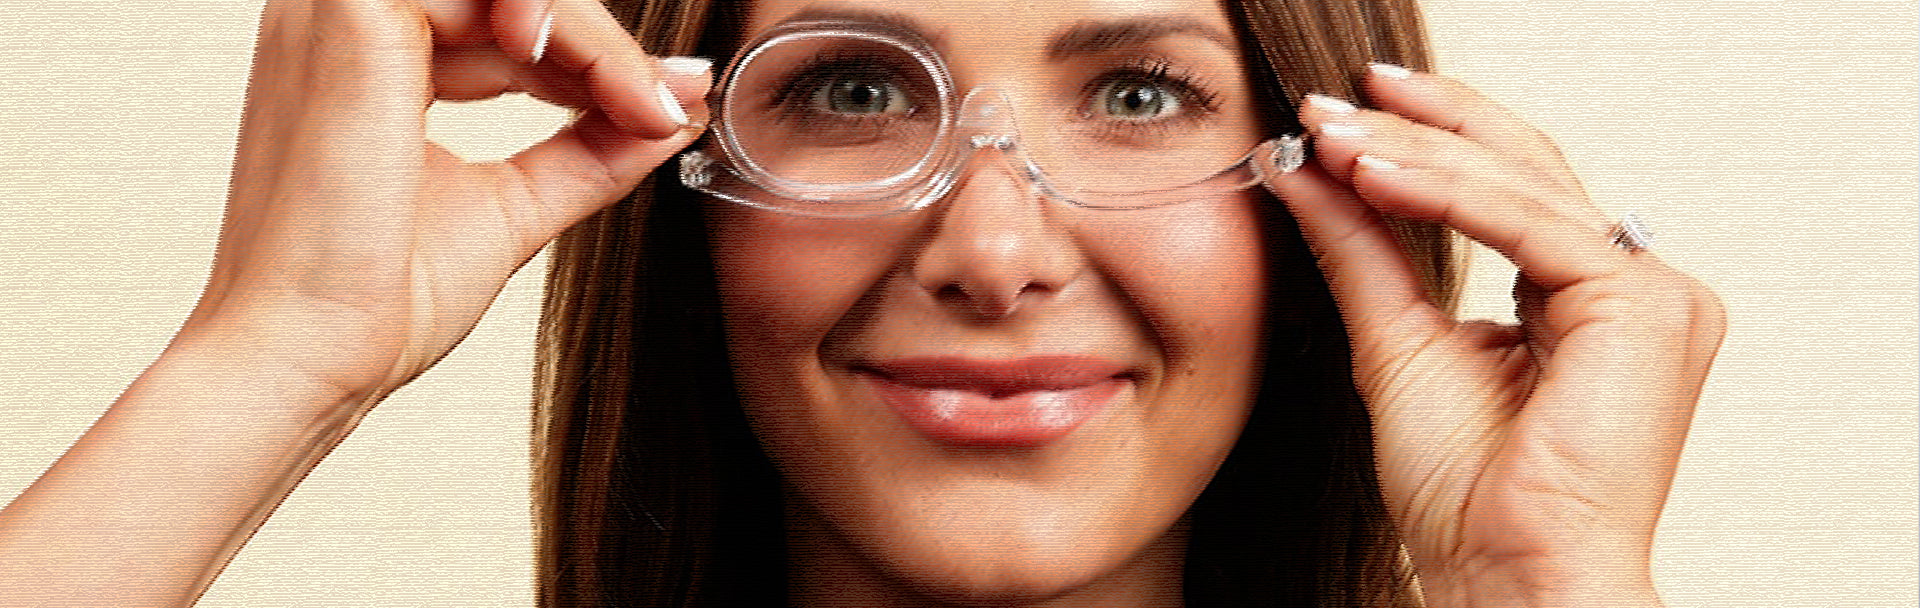 Largest image in Eye Spy the Perfect Cosmetic Solution: Makeup Glasses!